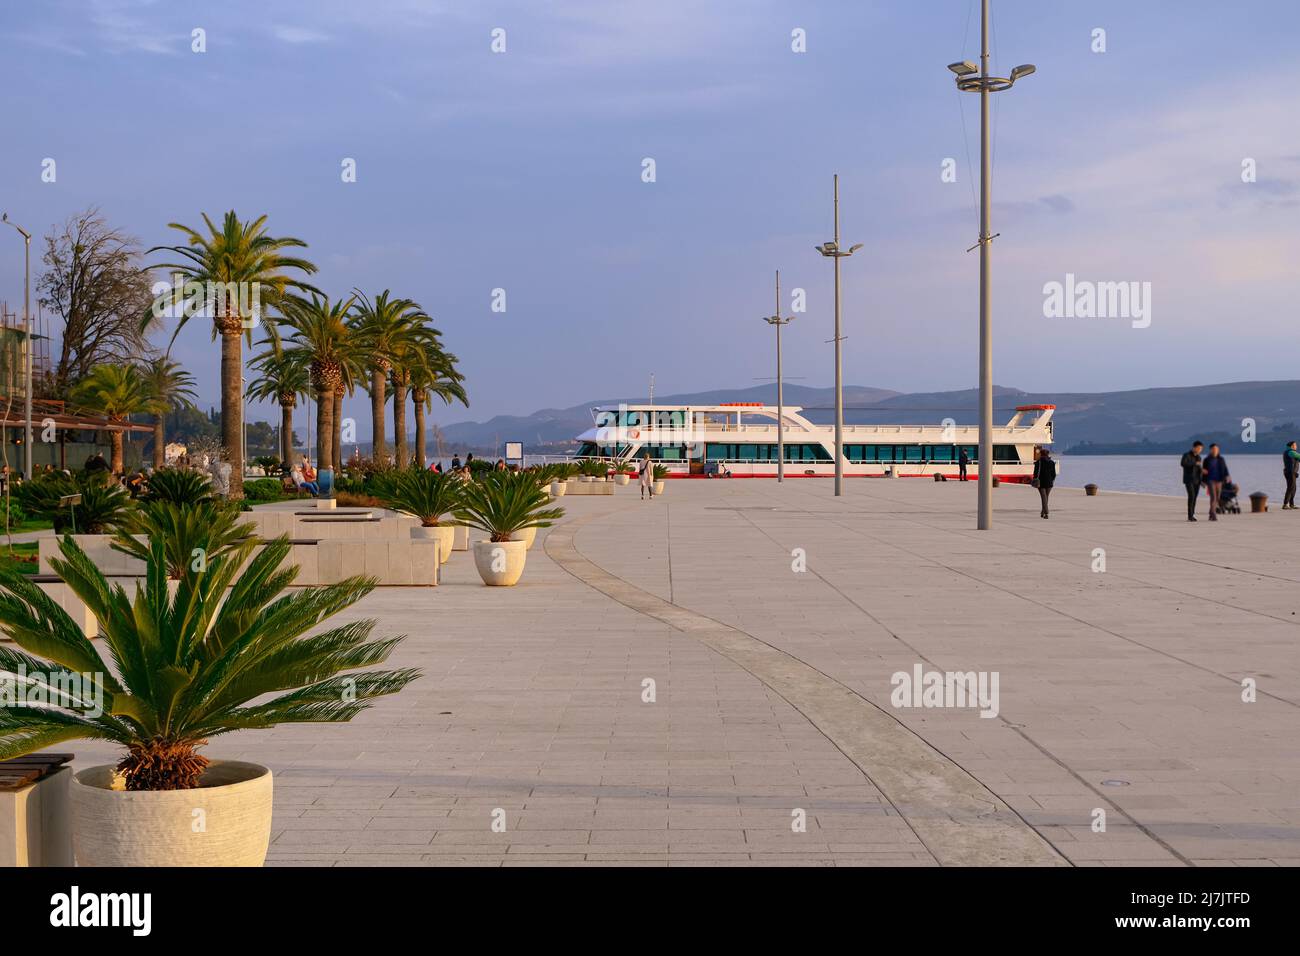 palm trees along beautiful promenade coast ferry and people silhouettes walking around. relax and calm world places Stock Photo